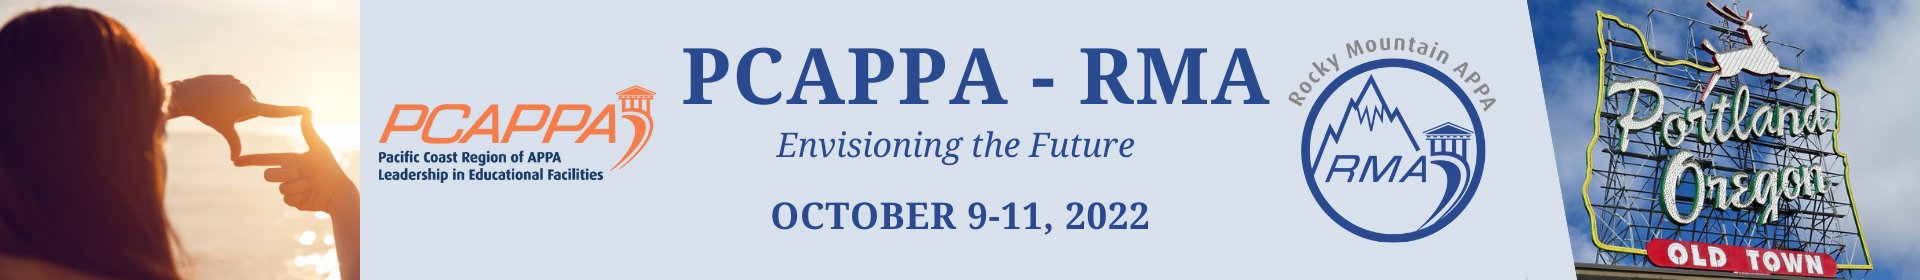 PCAPPA - RMA Conference  Event Banner